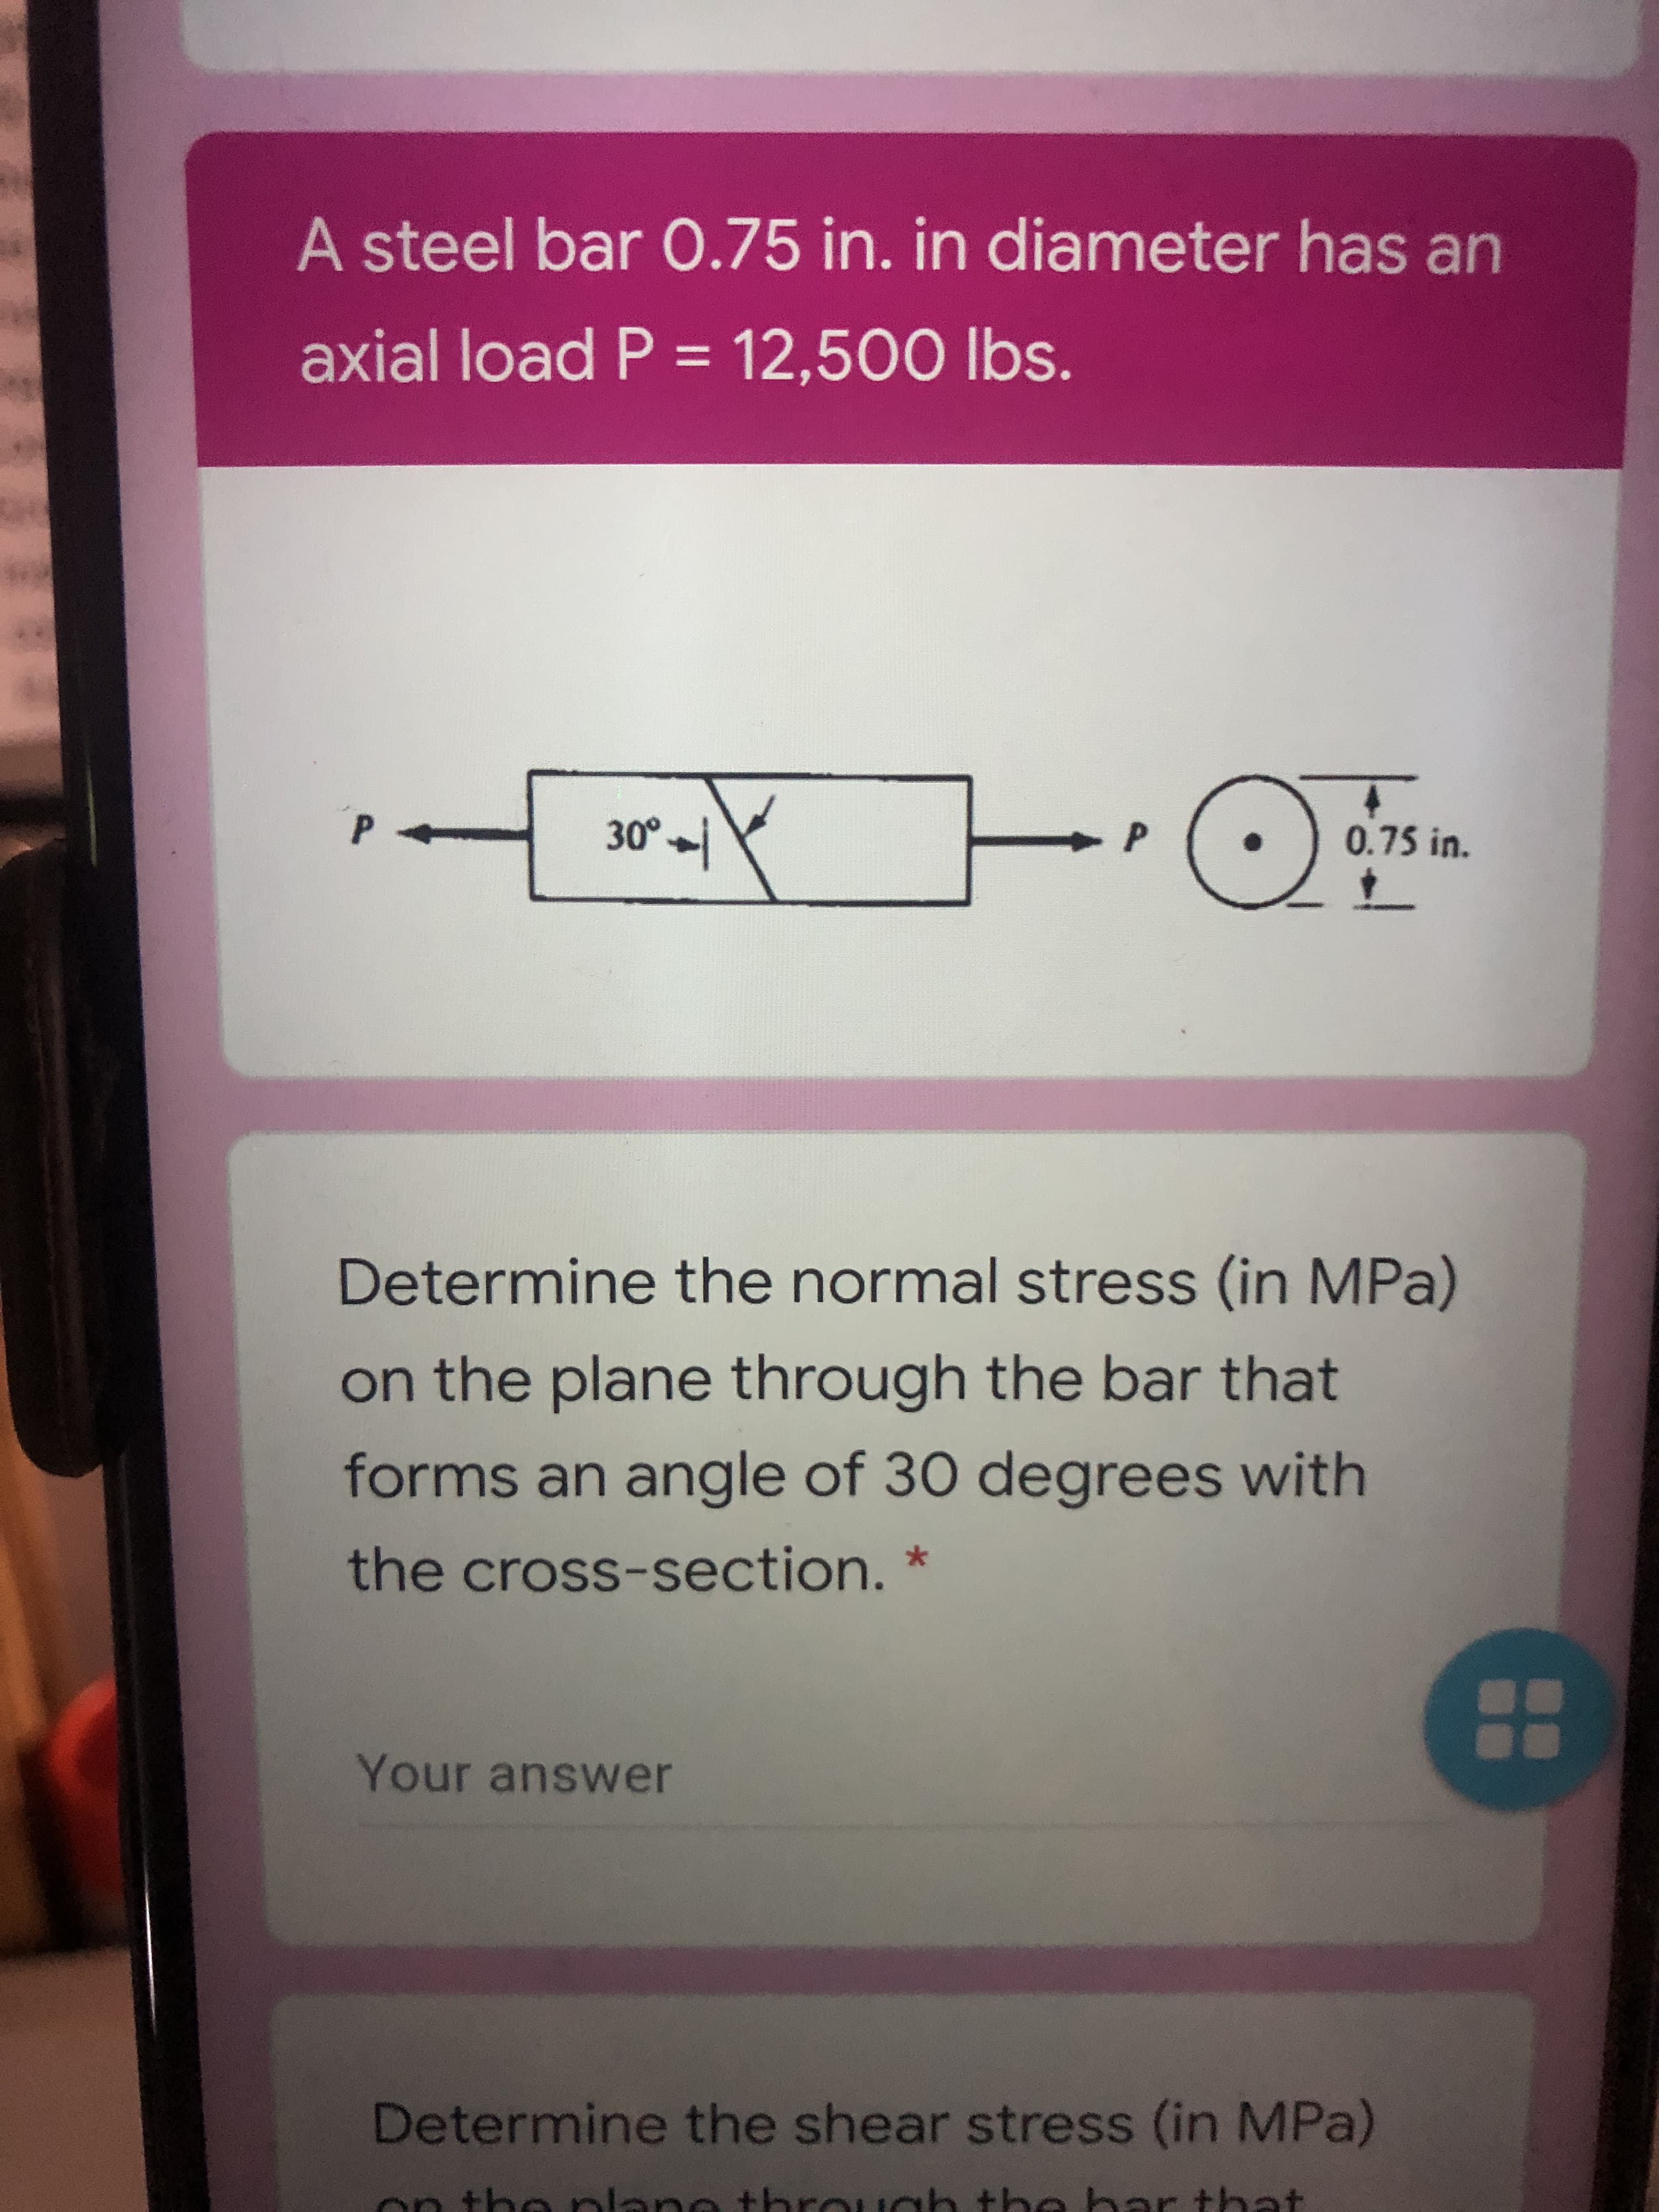 A steel bar O.75 in. in diameter has an
axial load P = 12,500 lbs.
%3D
0.75 in.
P-
Determine the normal stress (in MPa)
on the plane through the bar that
forms an angle of 30 degrees with
the cross-section.
Your answer
88
Determine the shear stress (in MPa)
on the plane through tbe bar that
